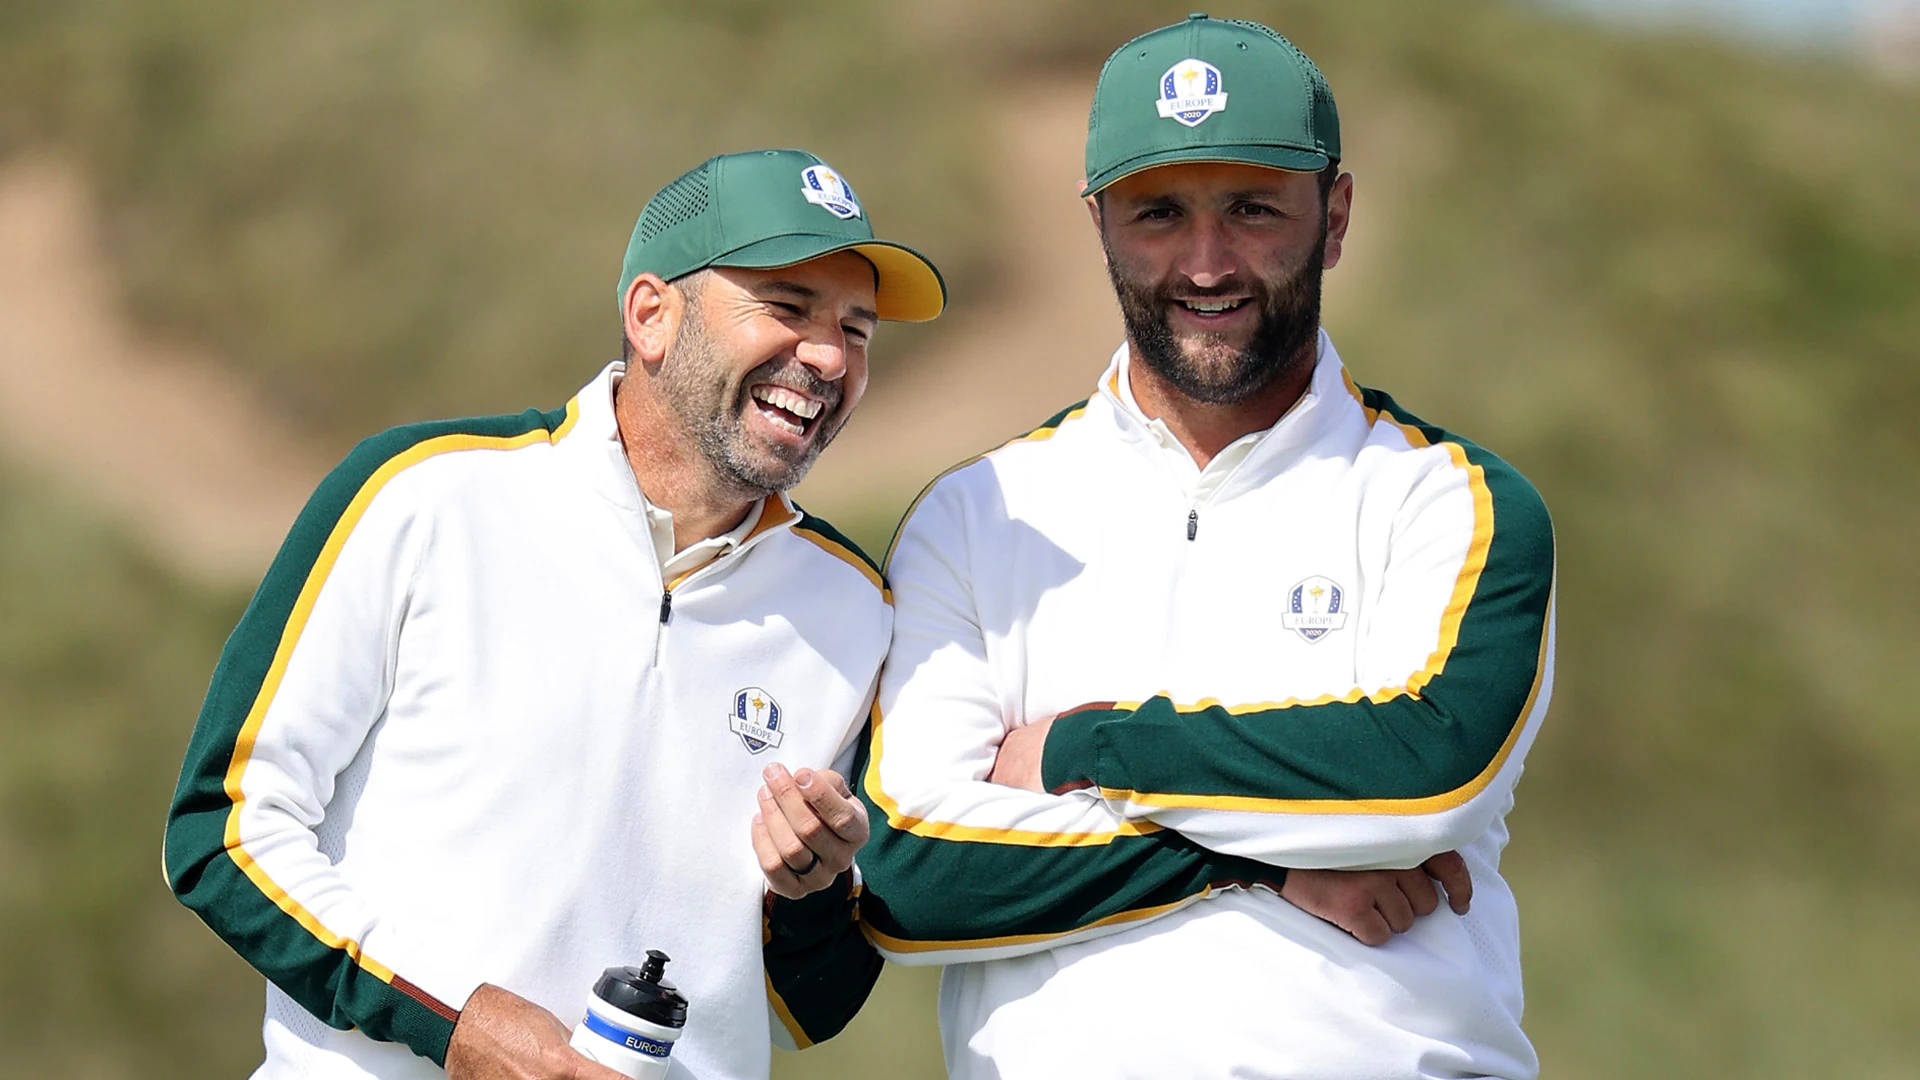 As 2020 Ryder Cup captains narrow pairings, they haven’t deviated much from their guts